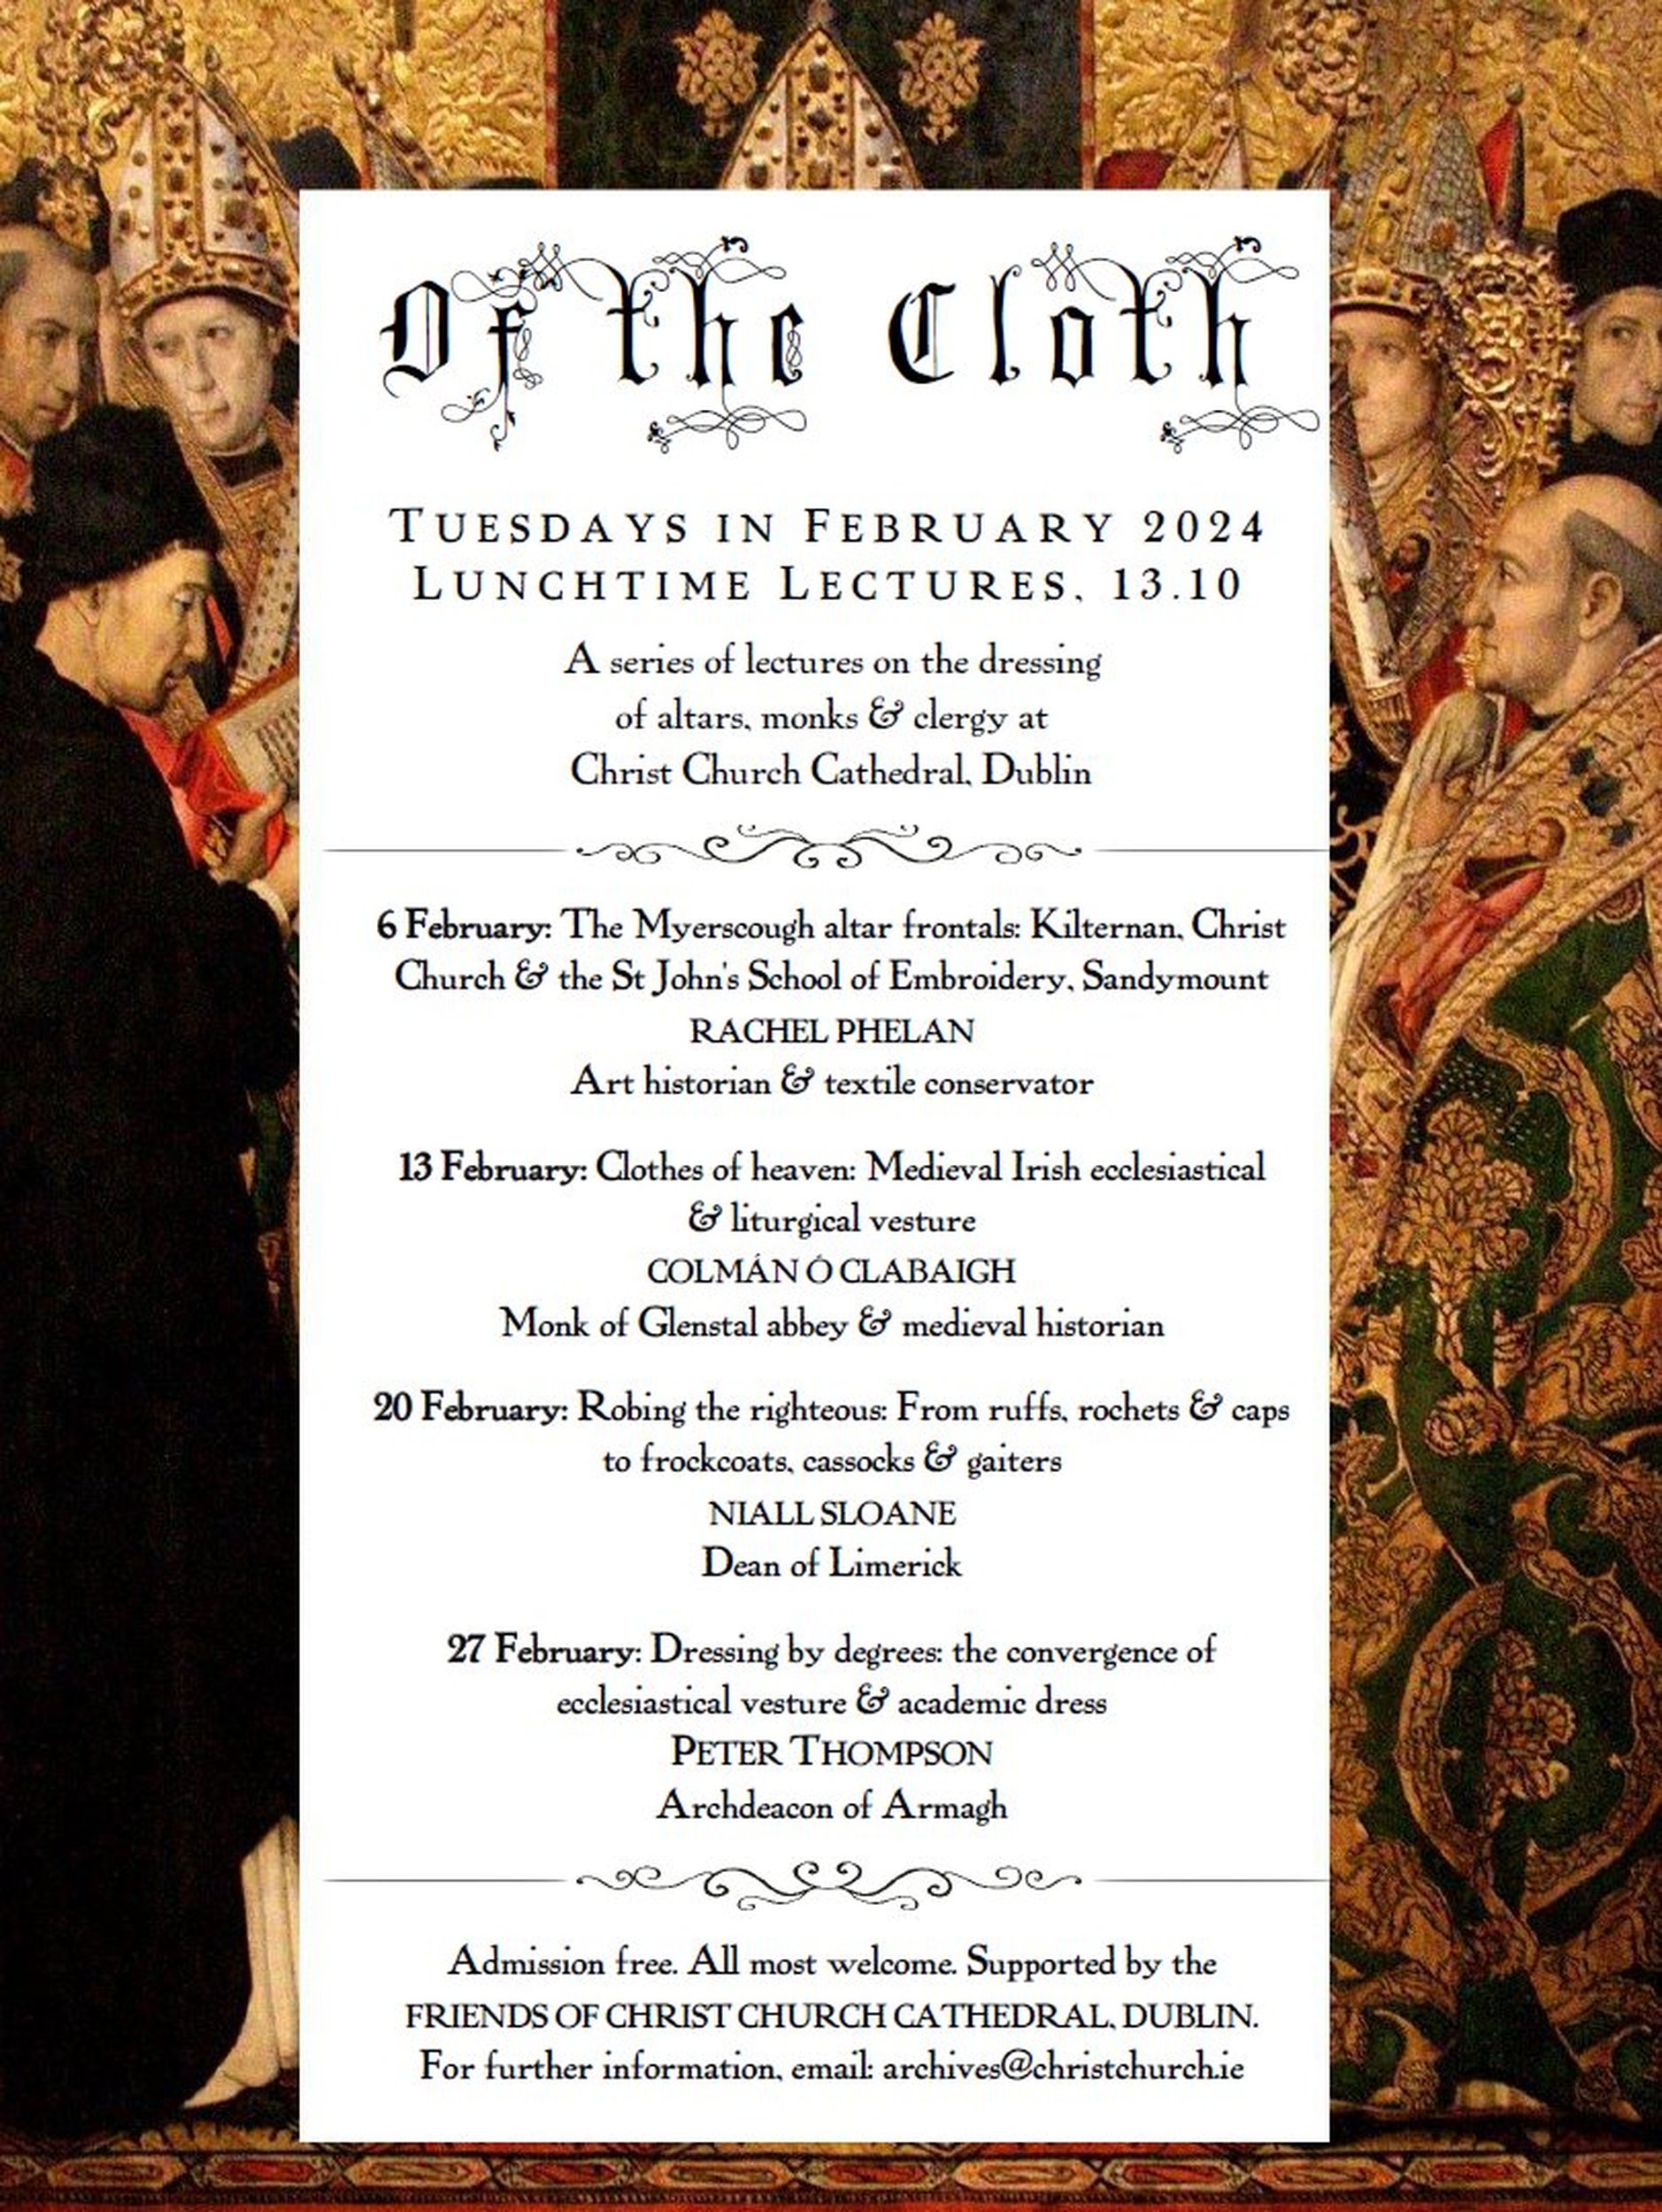 Of the Cloth – February Lectures at Christ Church Cathedral, Dublin - Tuesdays in February at 1.10pm